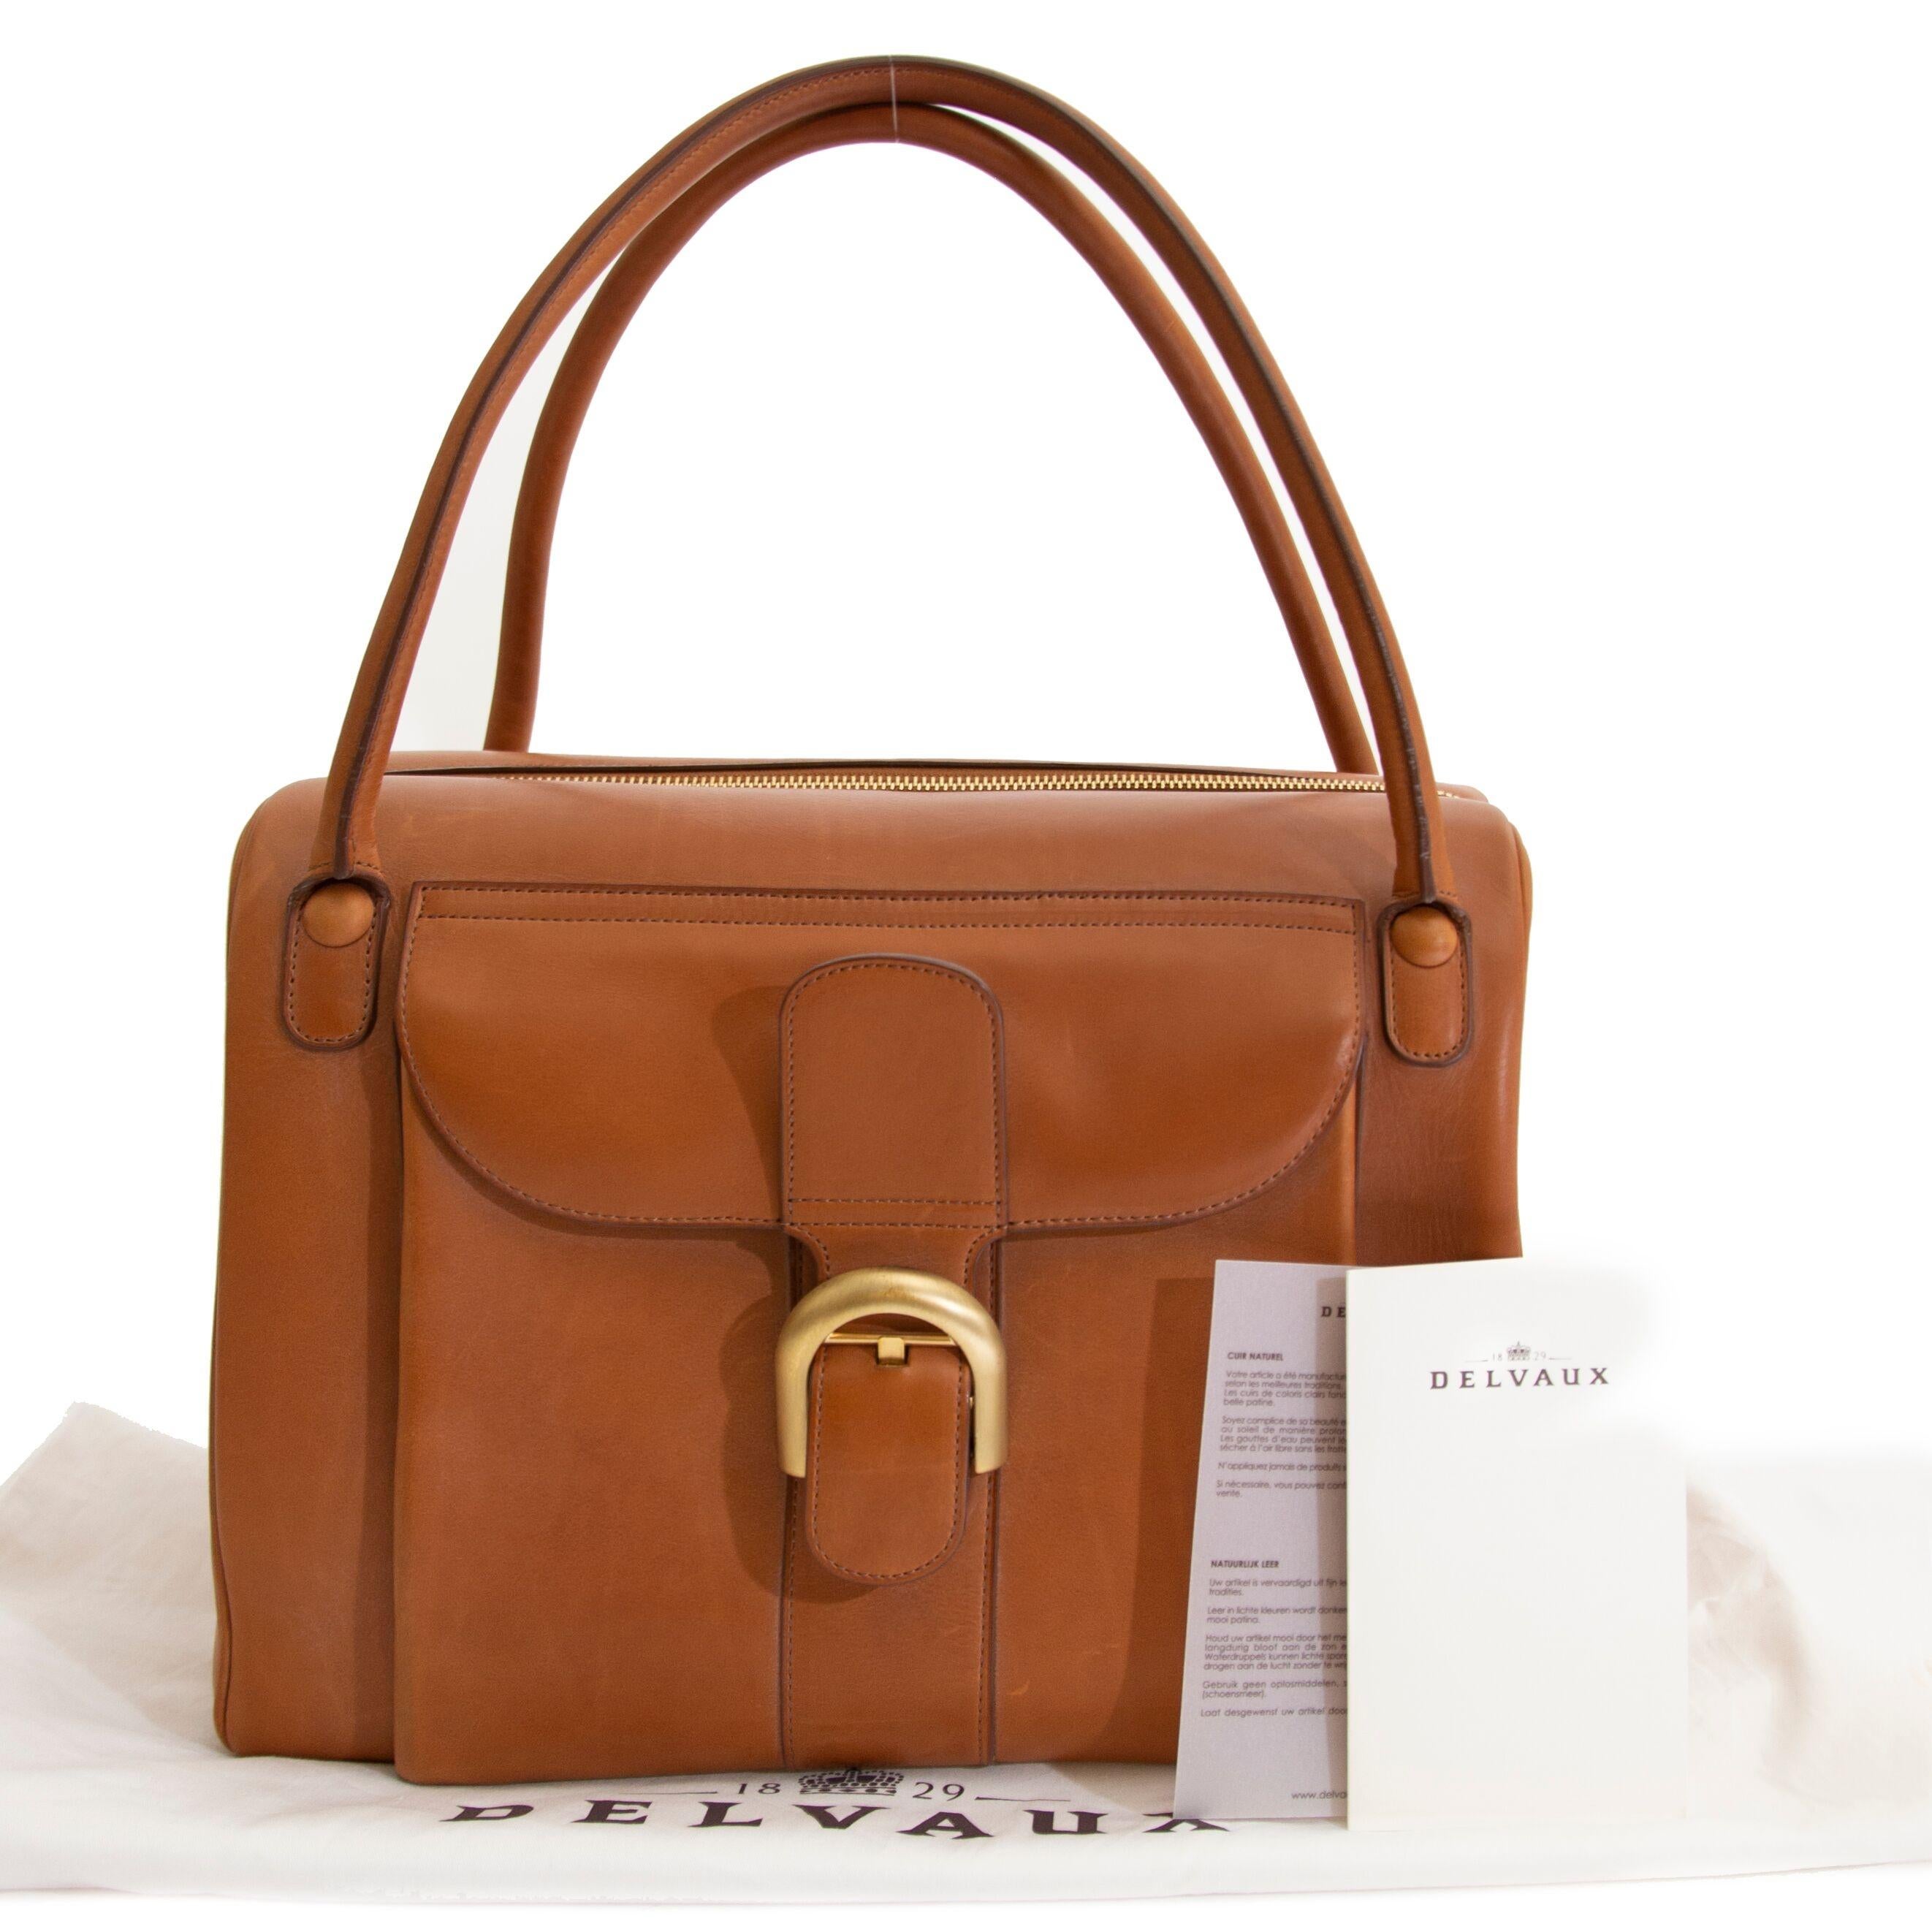 Very good preloved condition

Delvaux Brillant 12H Fauve Bourgogne

This charming Delvaux 12H is the perfect bag for a short get-away in style. The front of the bag looks like a classic Brillant, but this stunning bag will hold all the essentials